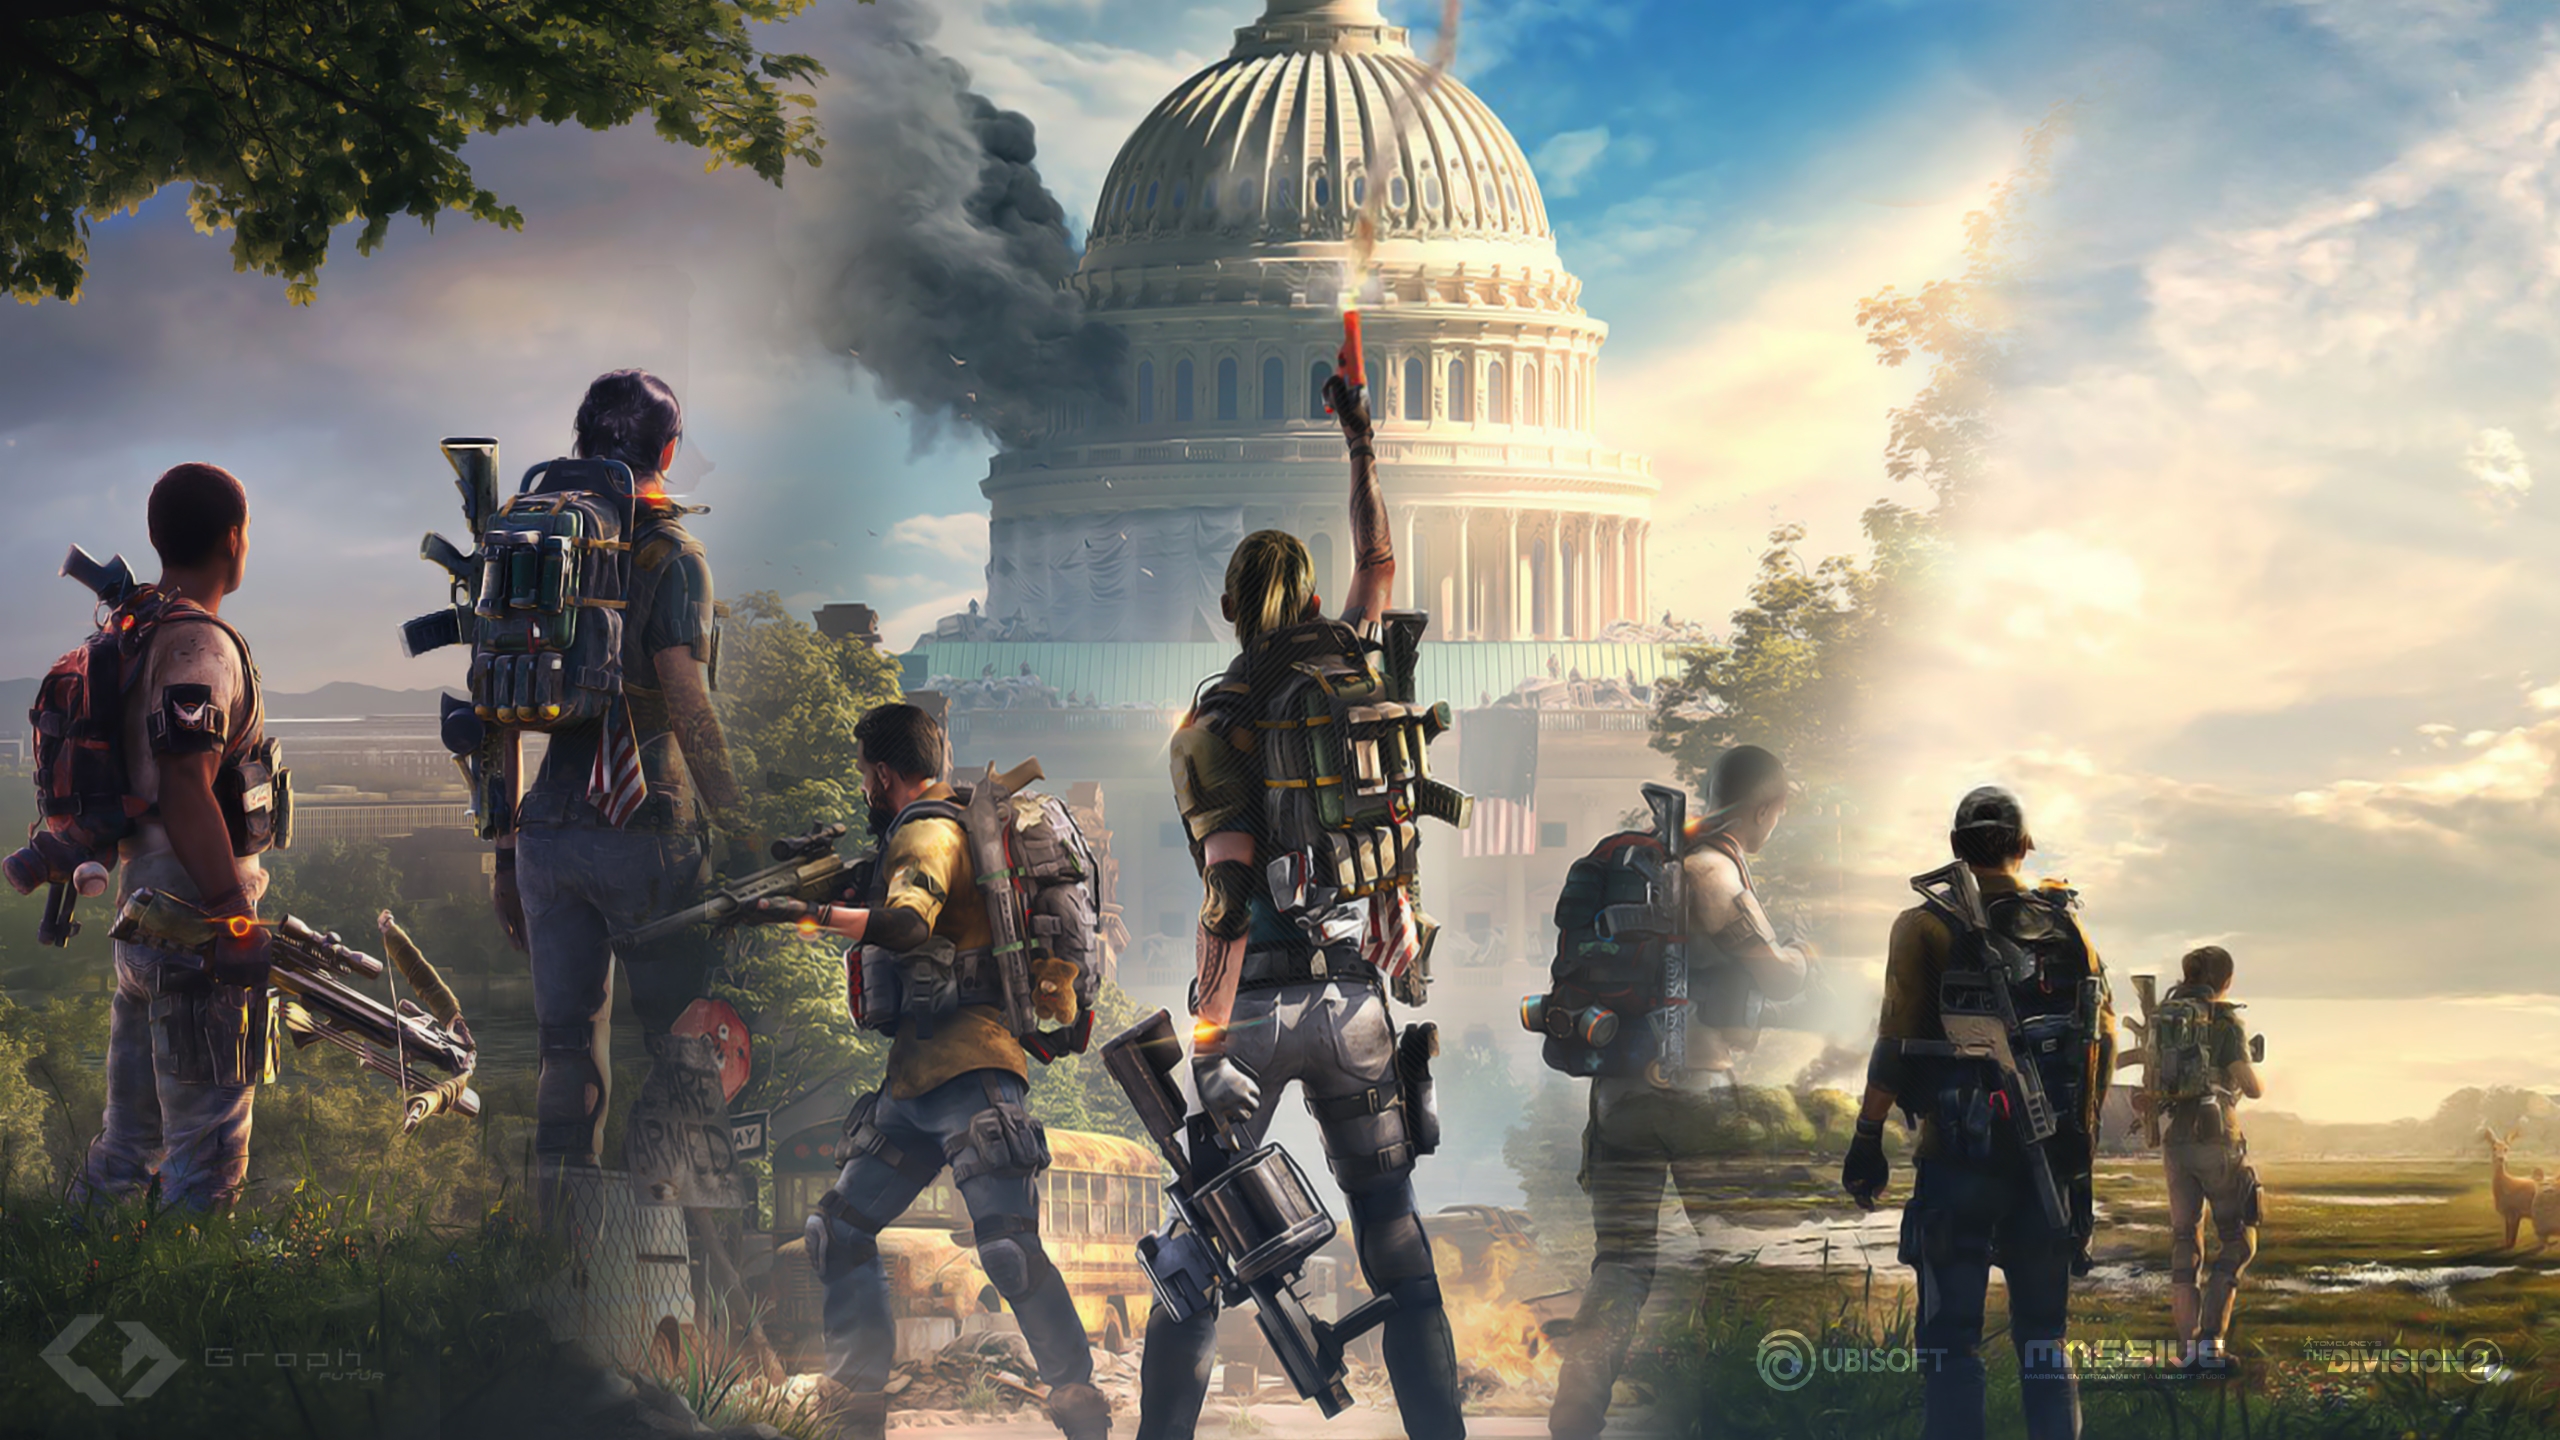 Download 2560x1440 Tom Clancys The Division 2 People Artwork 2560x1440